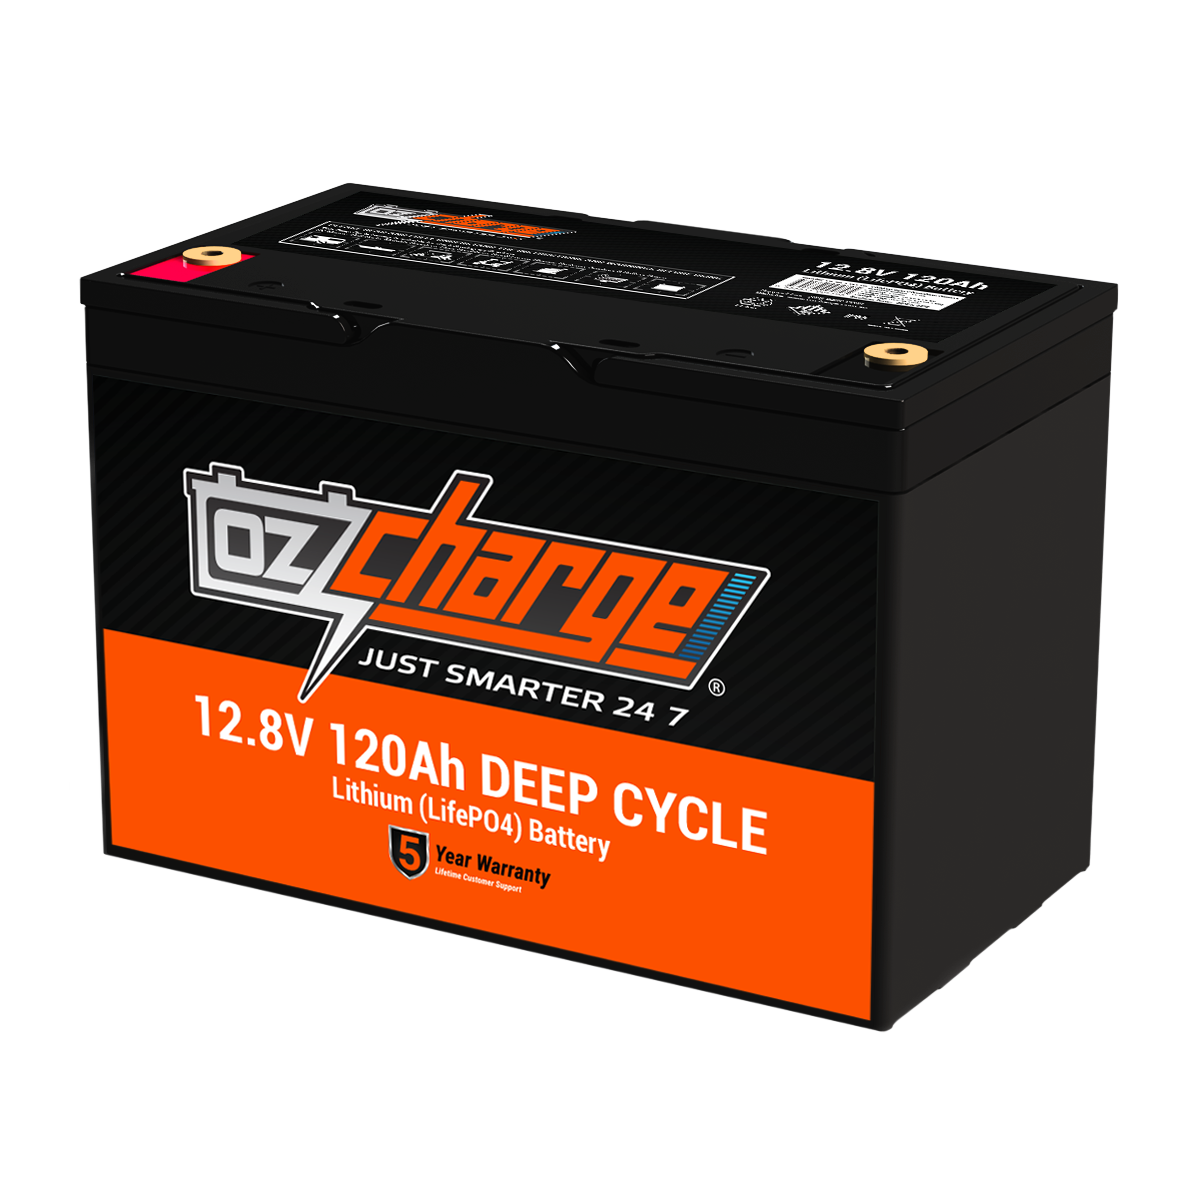 How to choose the correct type and size of Lithium Battery